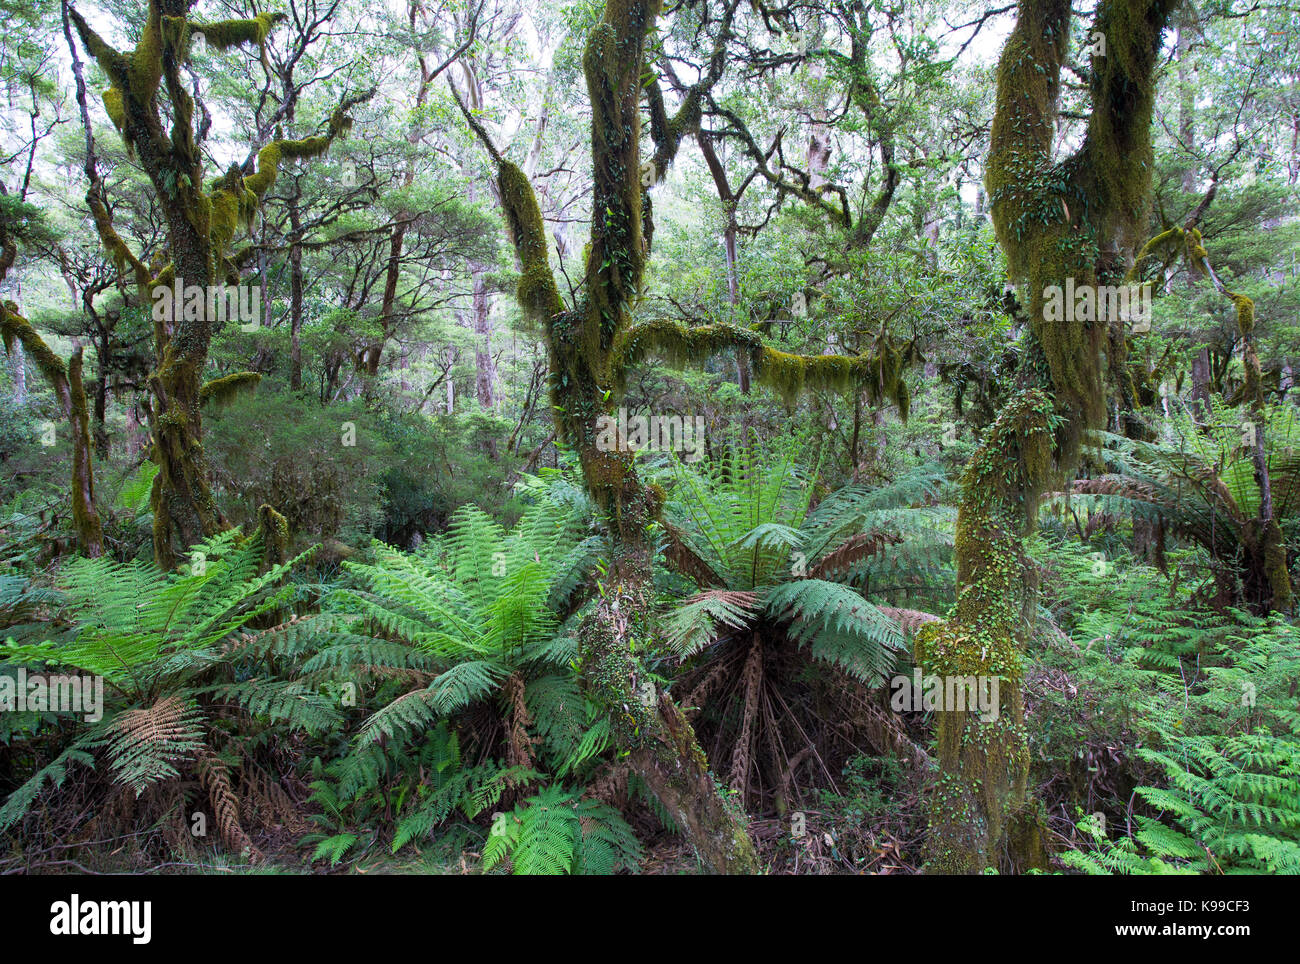 Mossy temperate forest with tree ferns in New England National Park, NSW, Australia Stock Photo